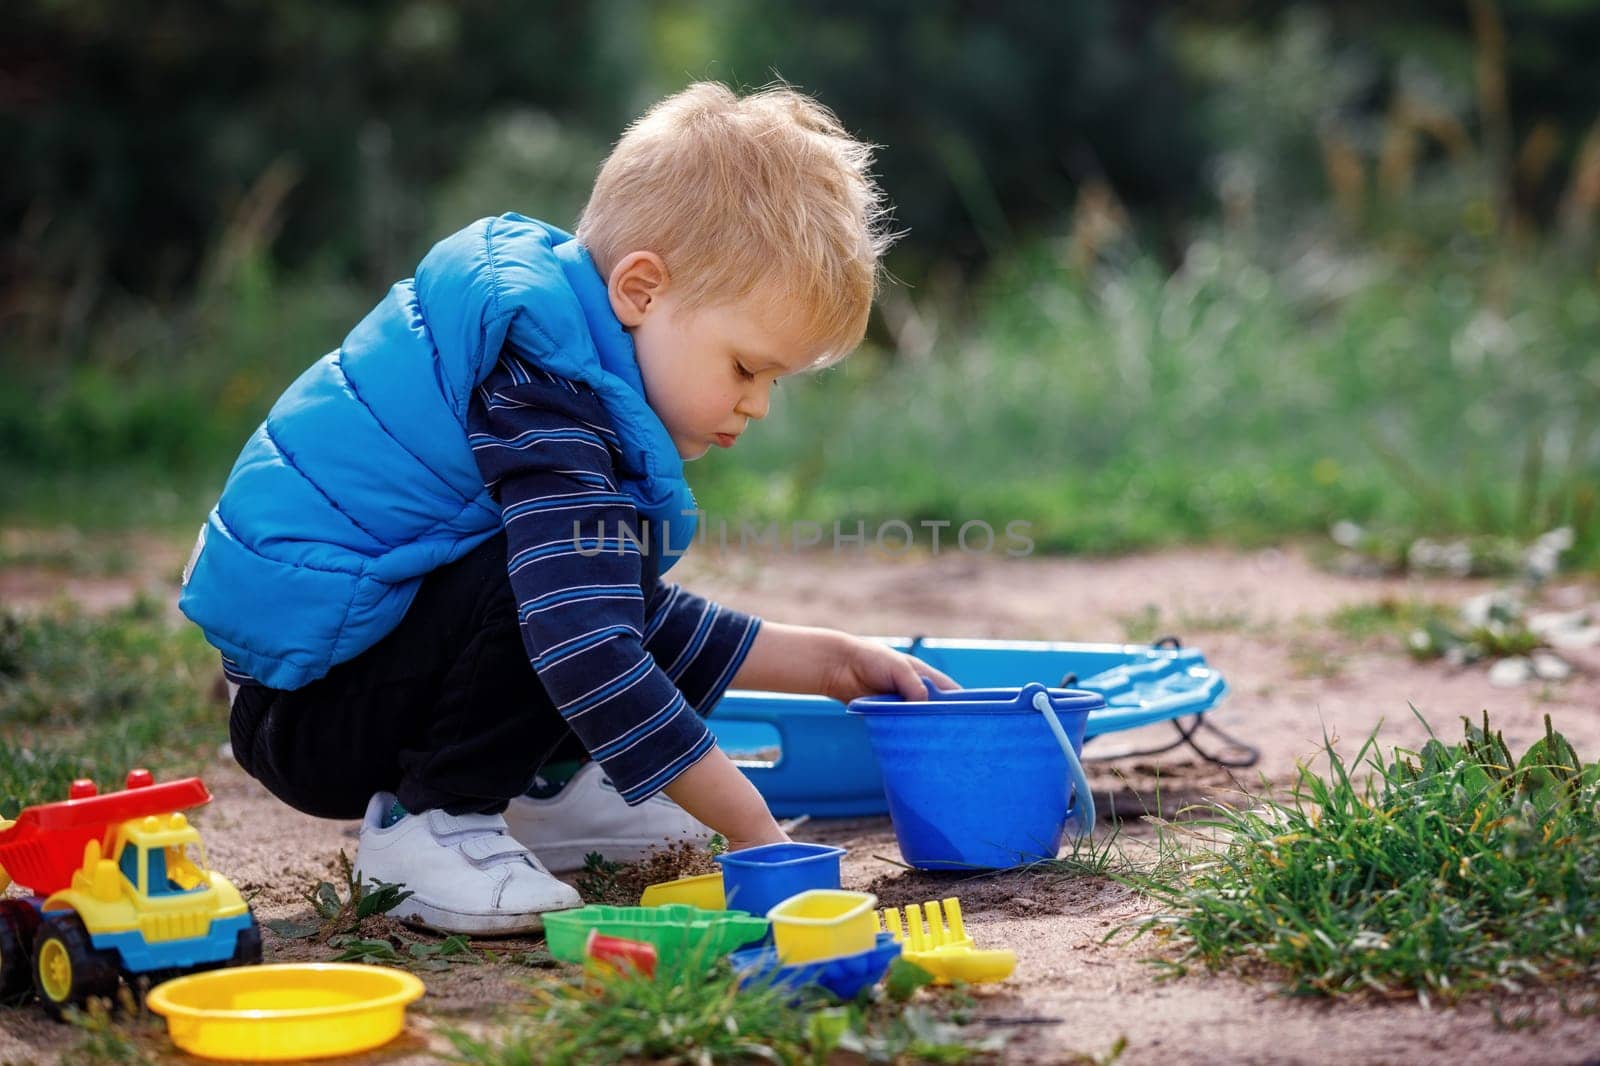 Child squat on the ground playing with sand toys. The child digs the sand into a plastic bucket. Summer outdoor activity for kids. Leisure Time. by Lincikas